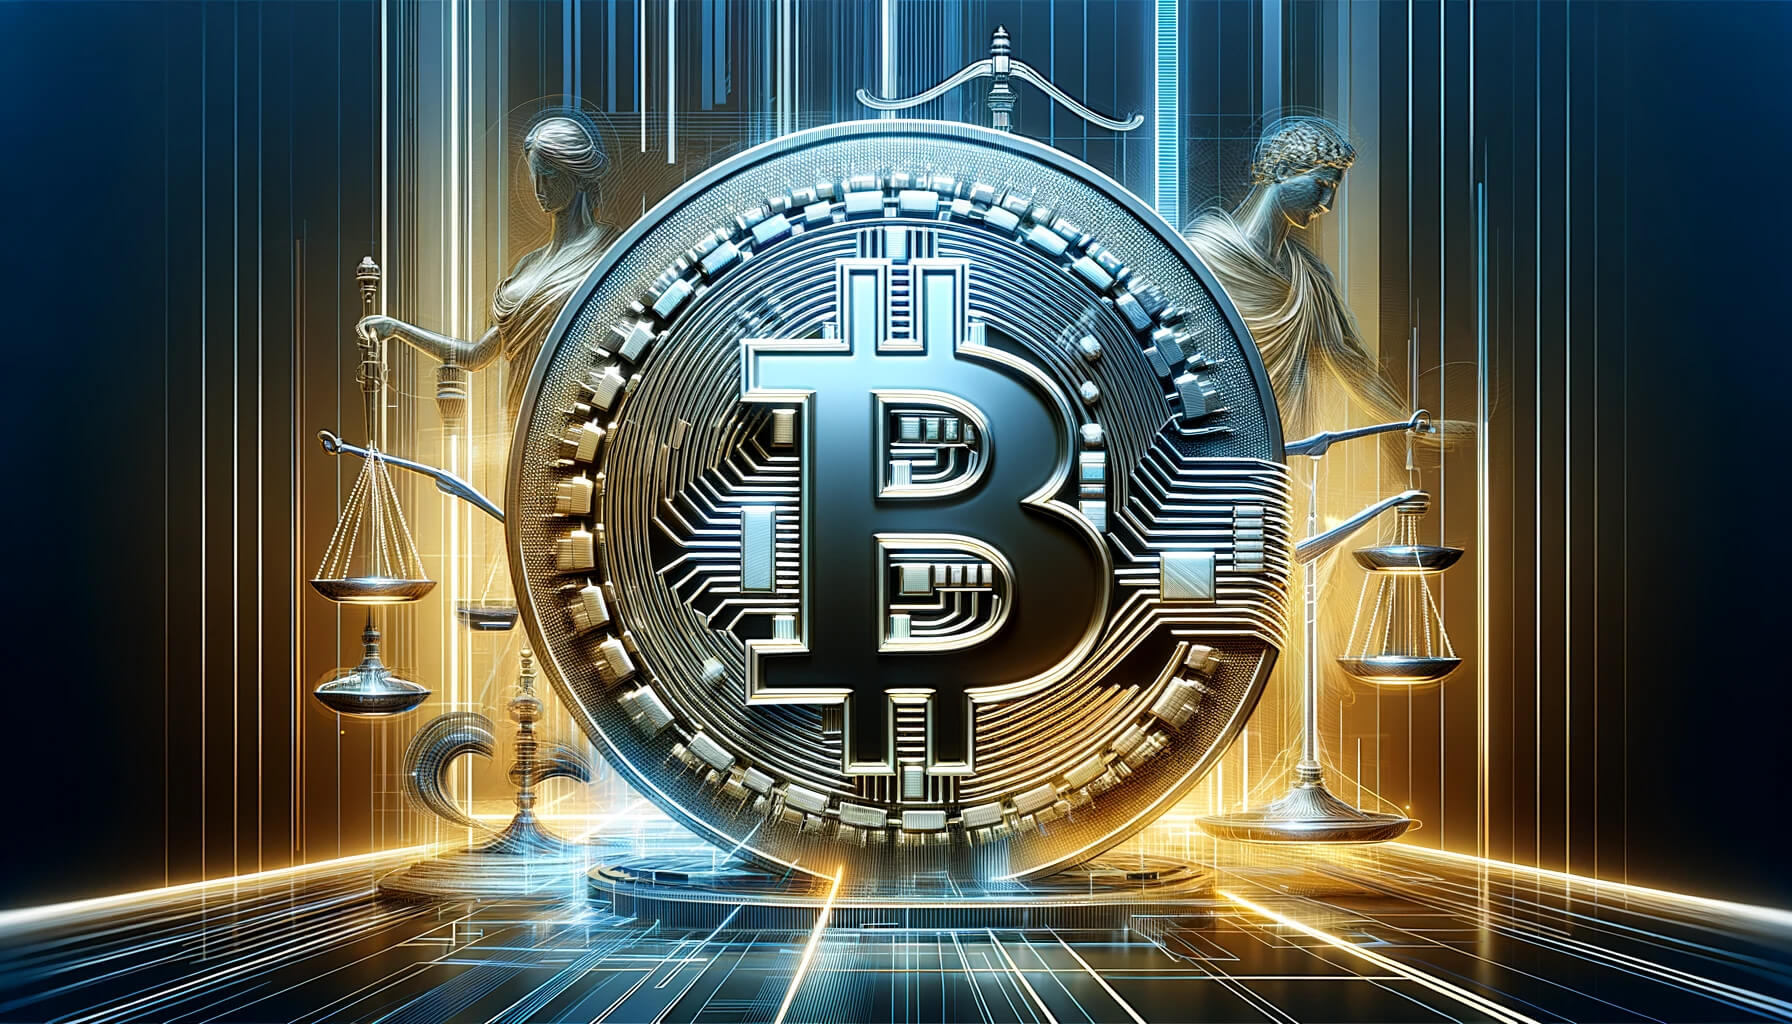 Dall%C2%B7E 2023 12 14 17.33.51 A Dynamic Futuristic Cover Image For A Tech Publication In Landscape Orientation Focusing On Bitcoin Etfs And Court Rulings. The Centerpiece Is A La